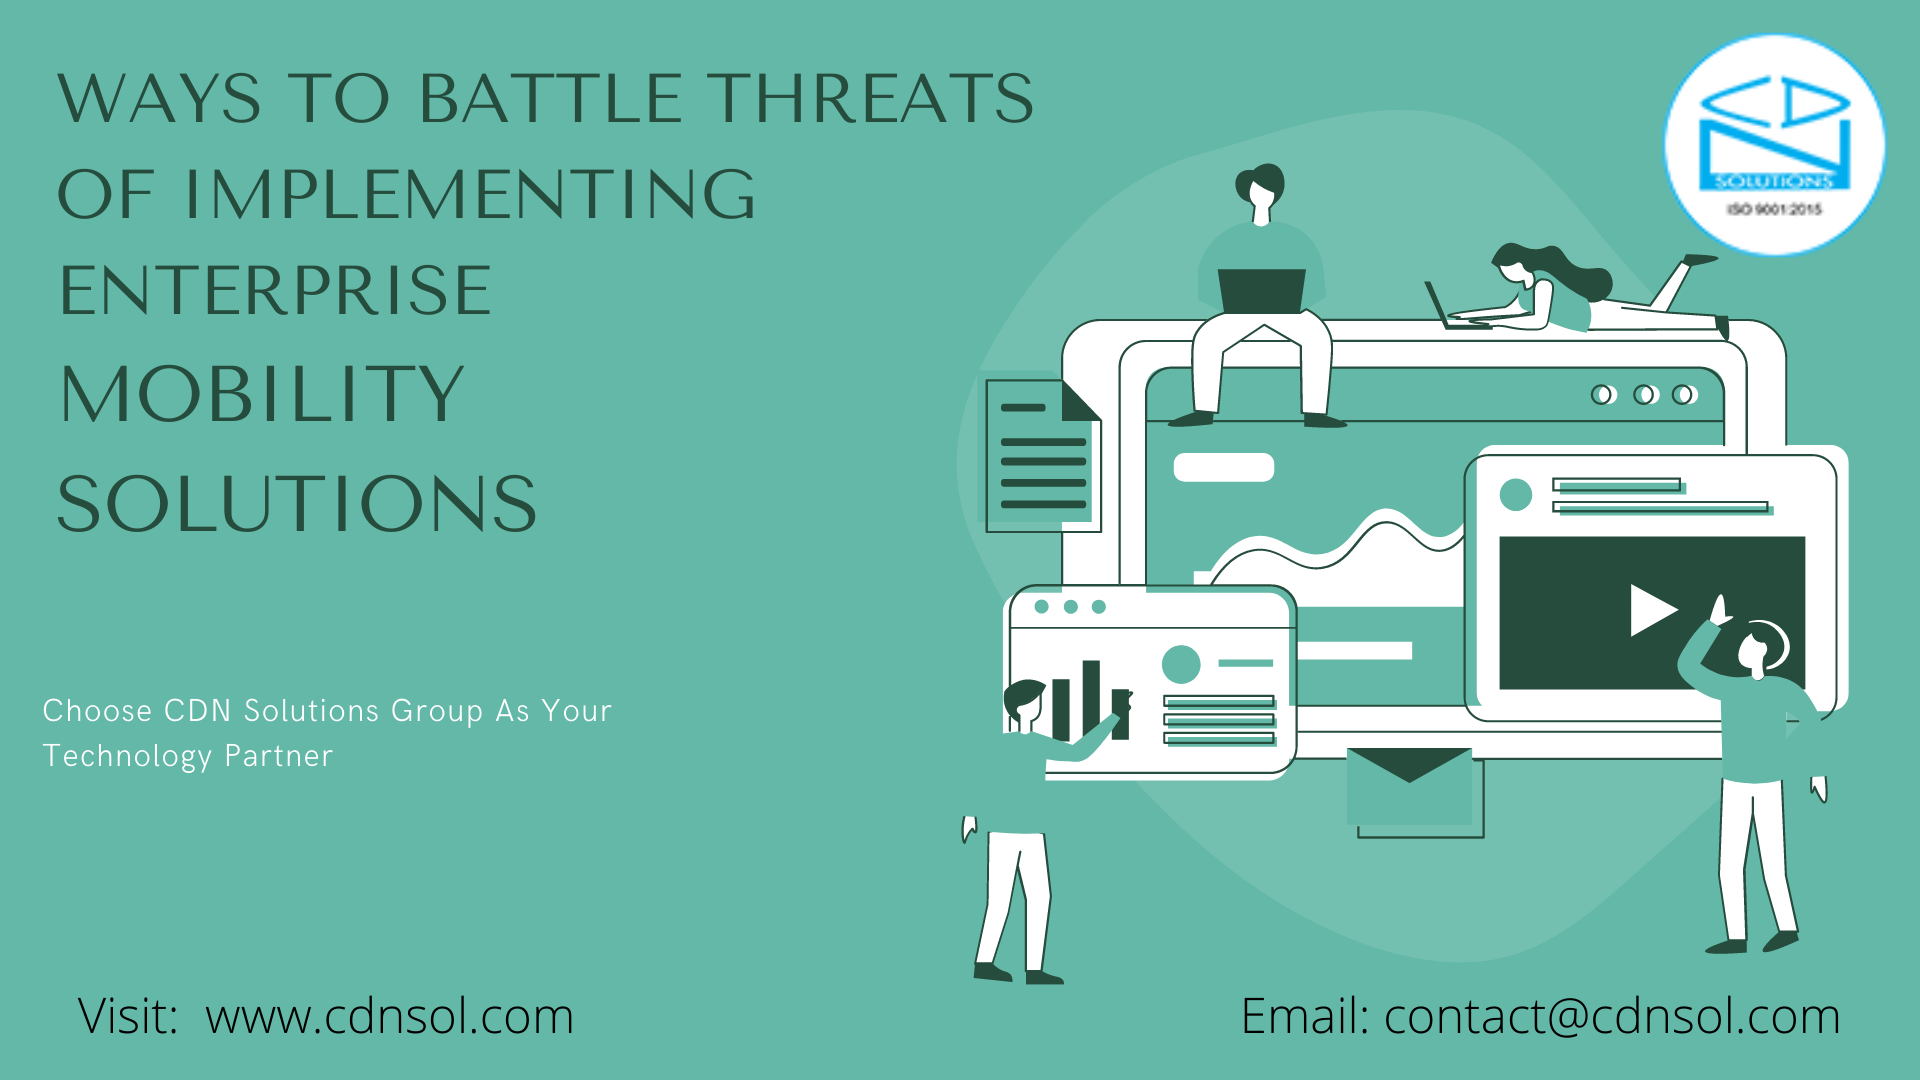 WAYS TO BATTLE THREATS OF IMPLEMENTING ENTERPRISE MOBILITY SOLUTIONS